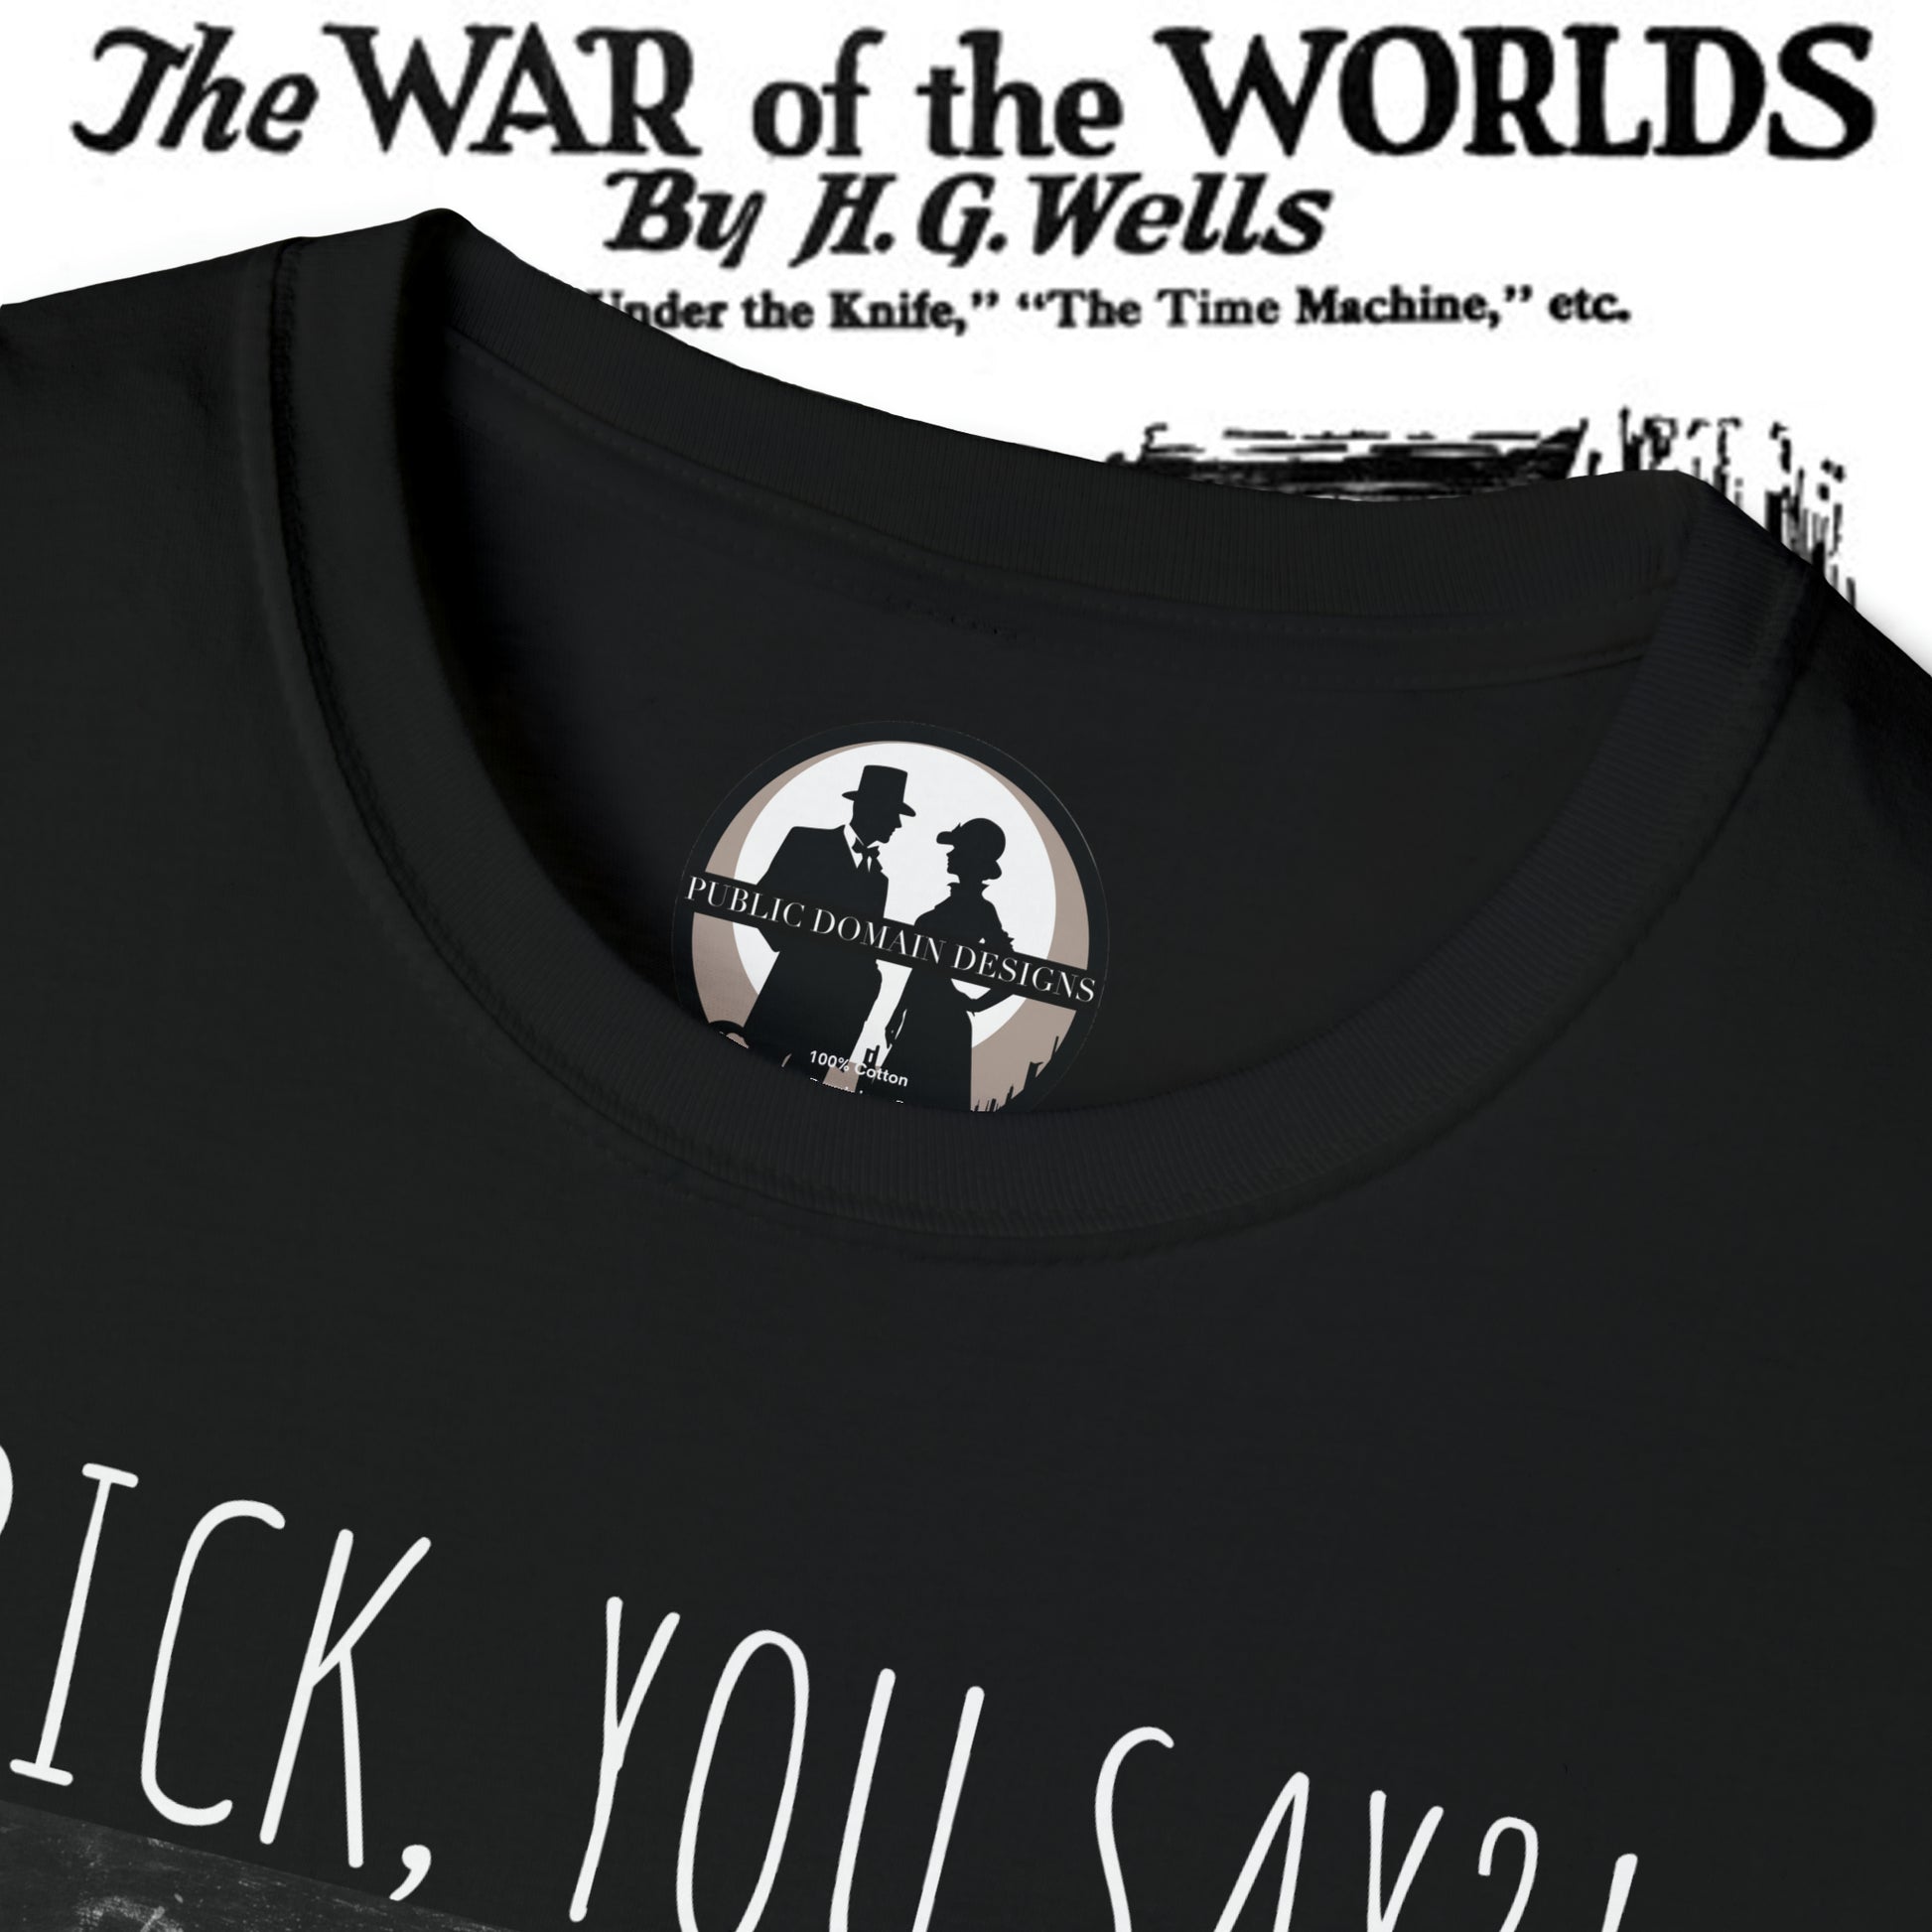 War of the Worlds – Public Domain Designs